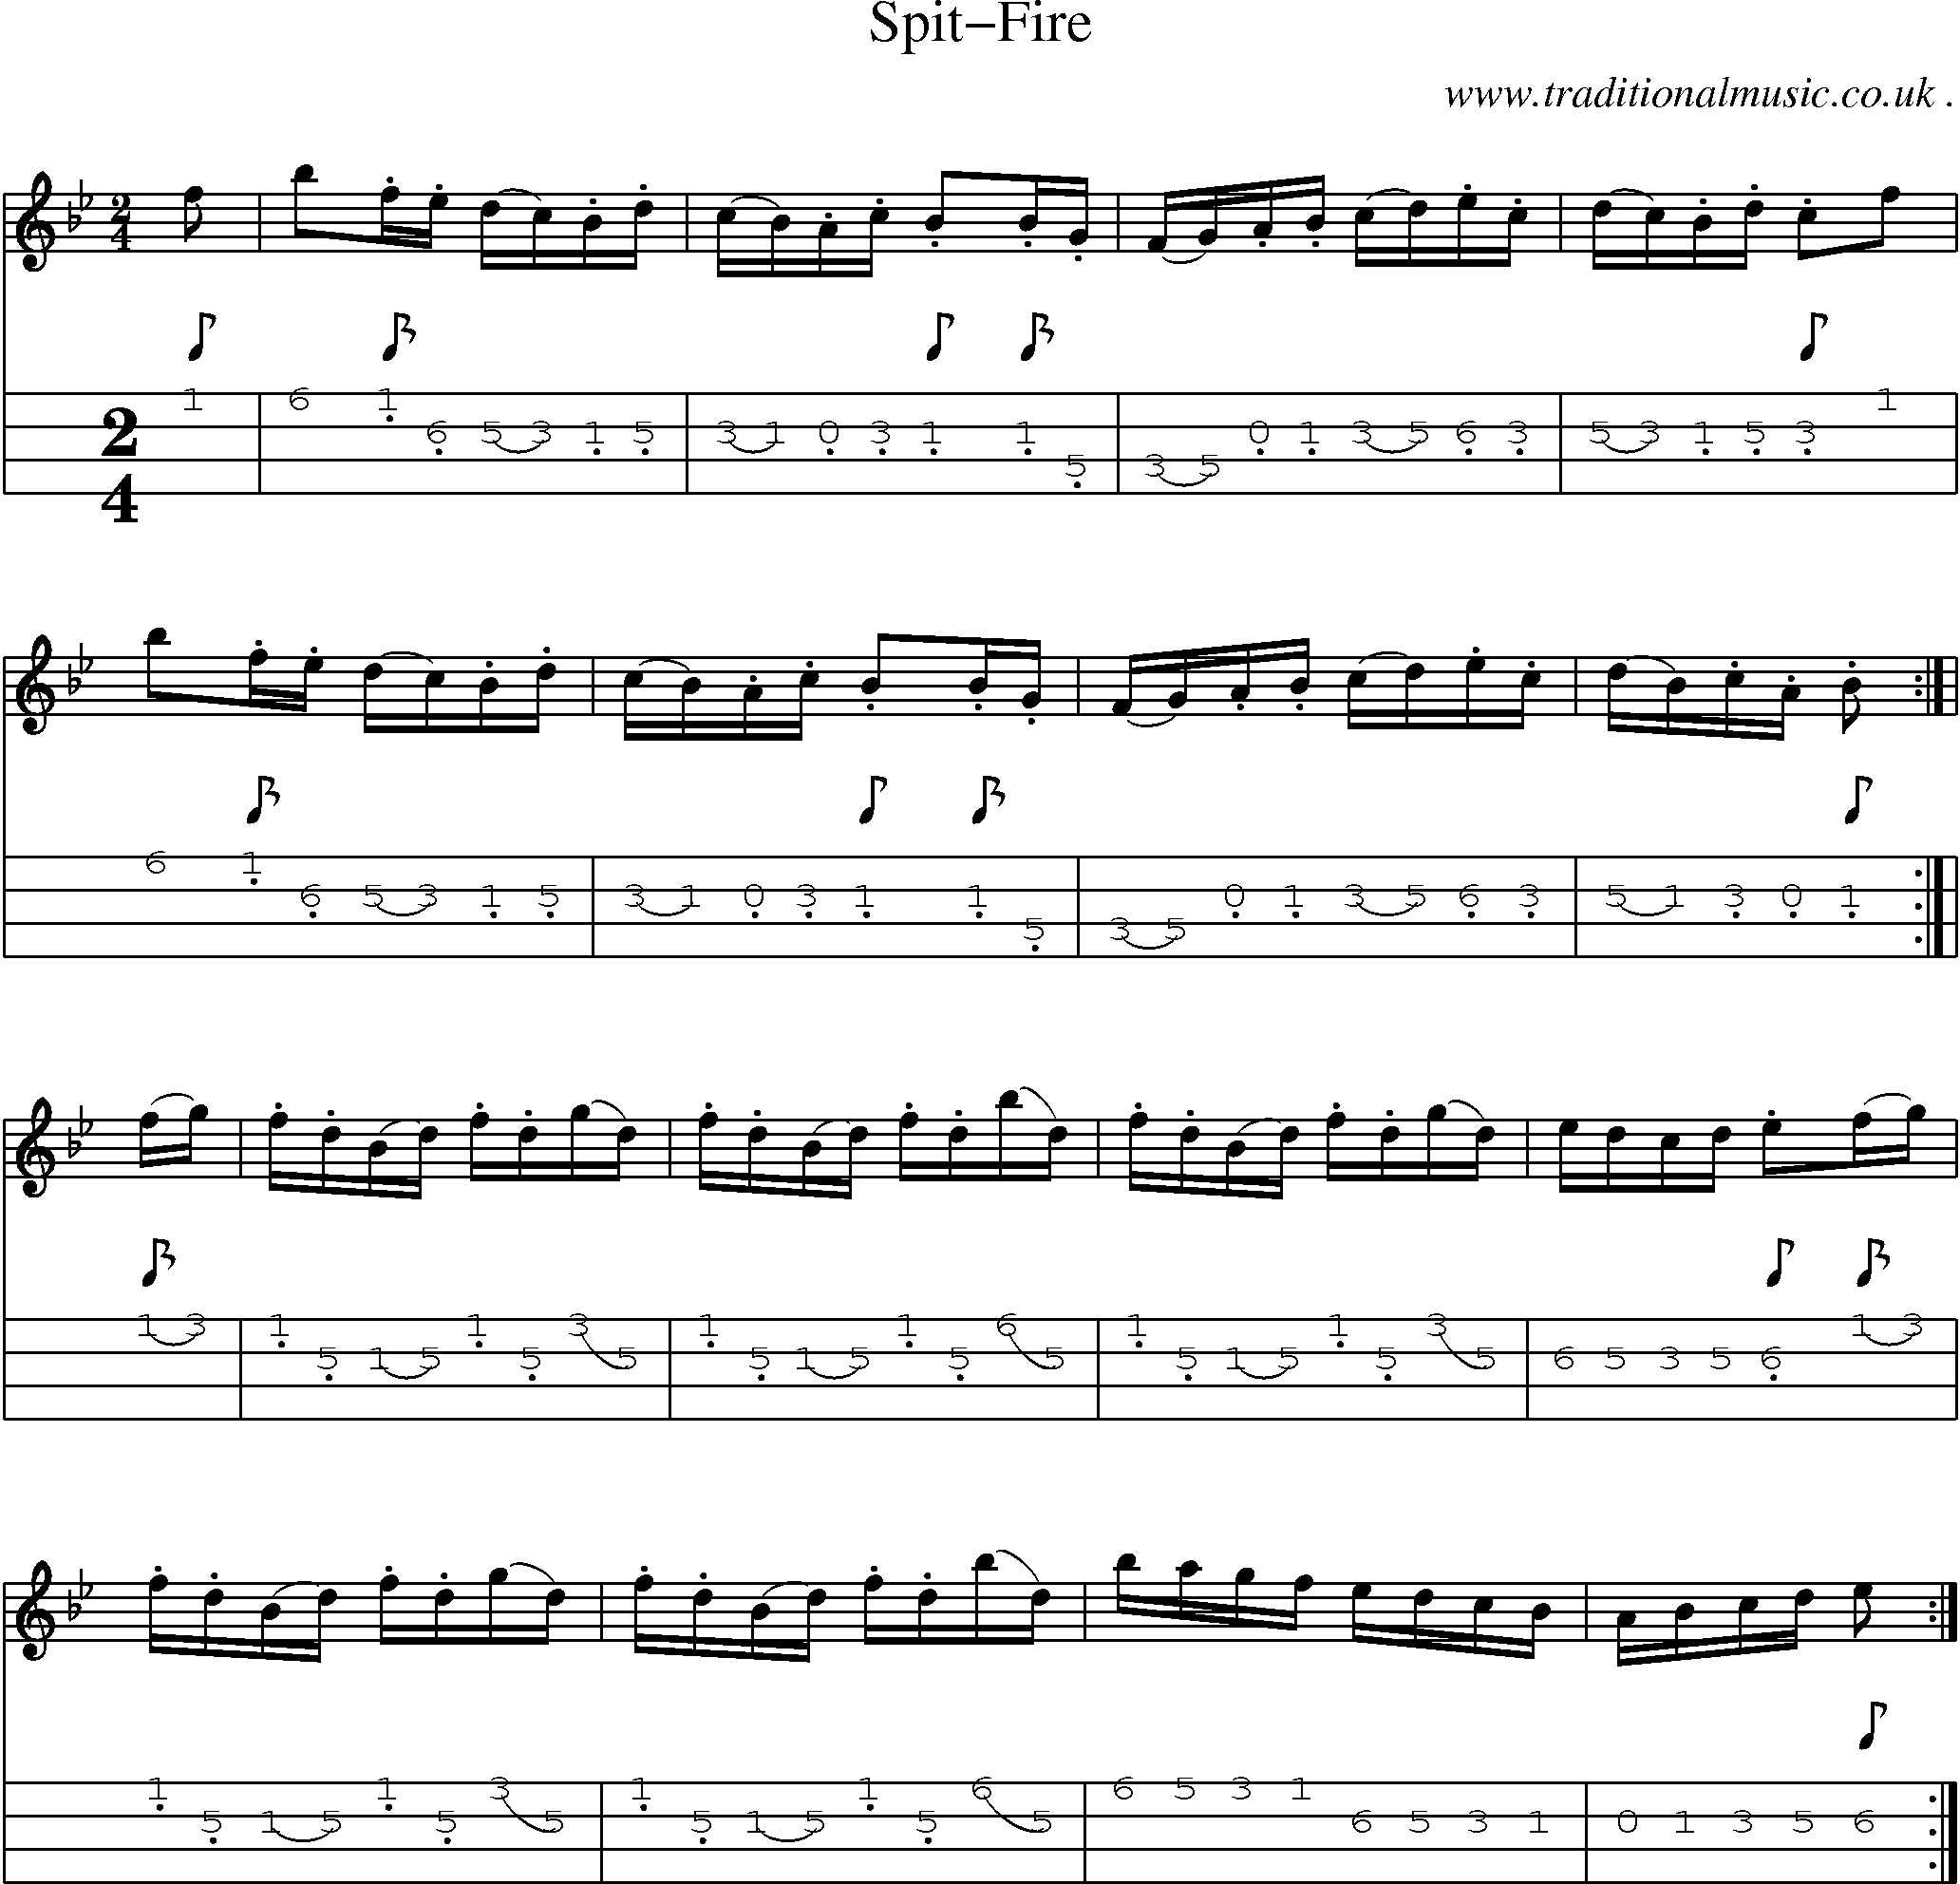 Sheet-Music and Mandolin Tabs for Spit-fire